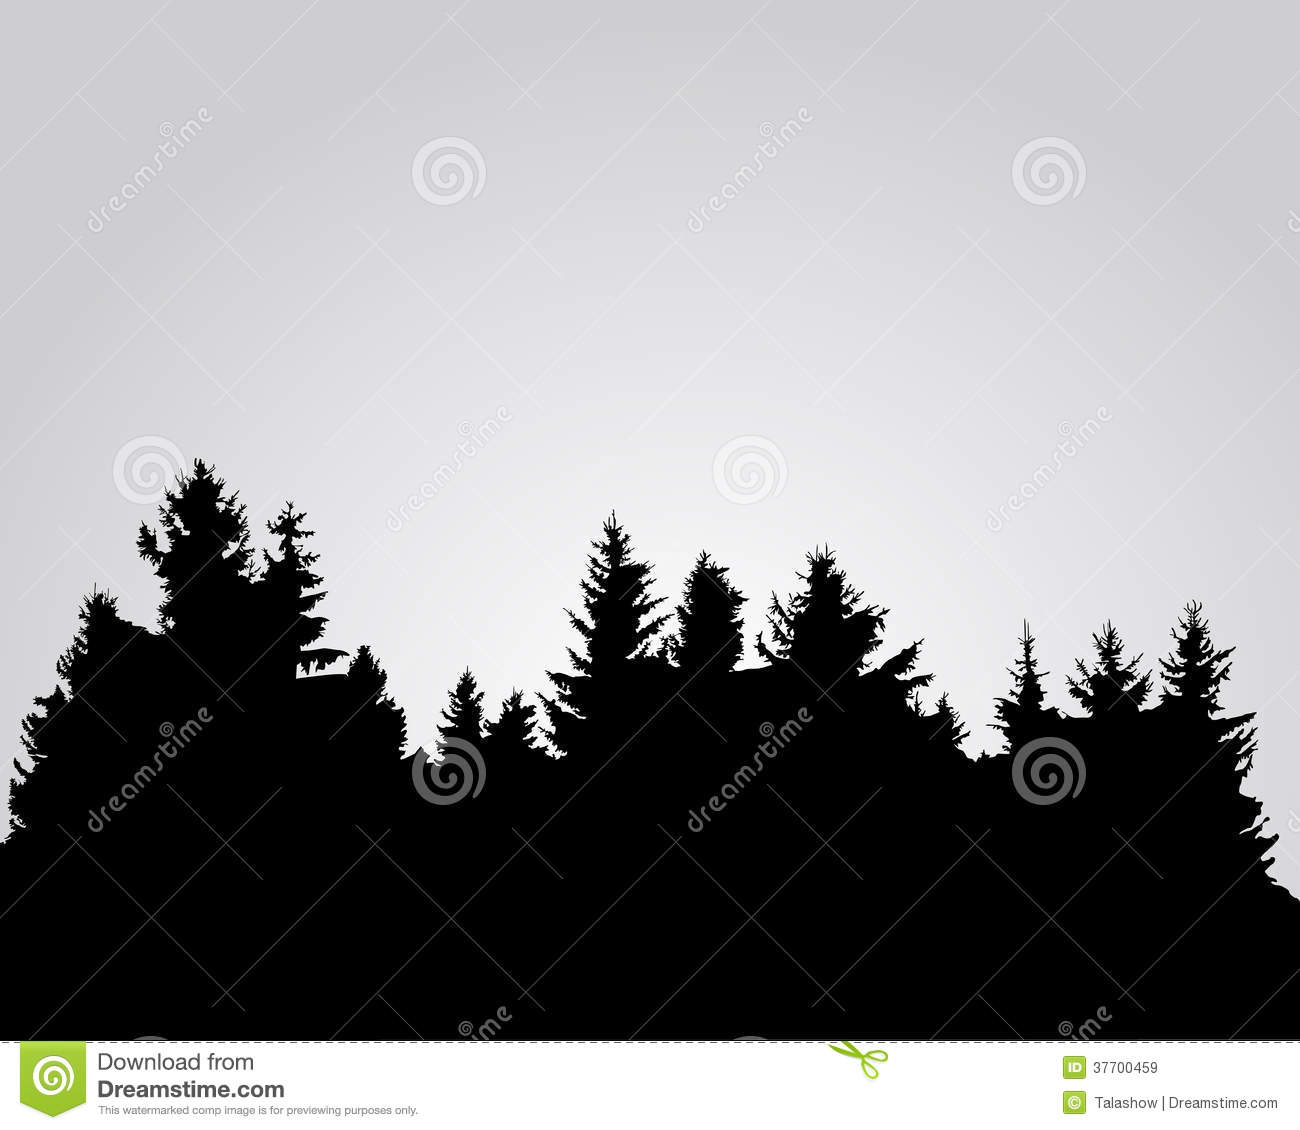 Silhouette Of Spruce Forest Royalty Free Stock Images   Image    